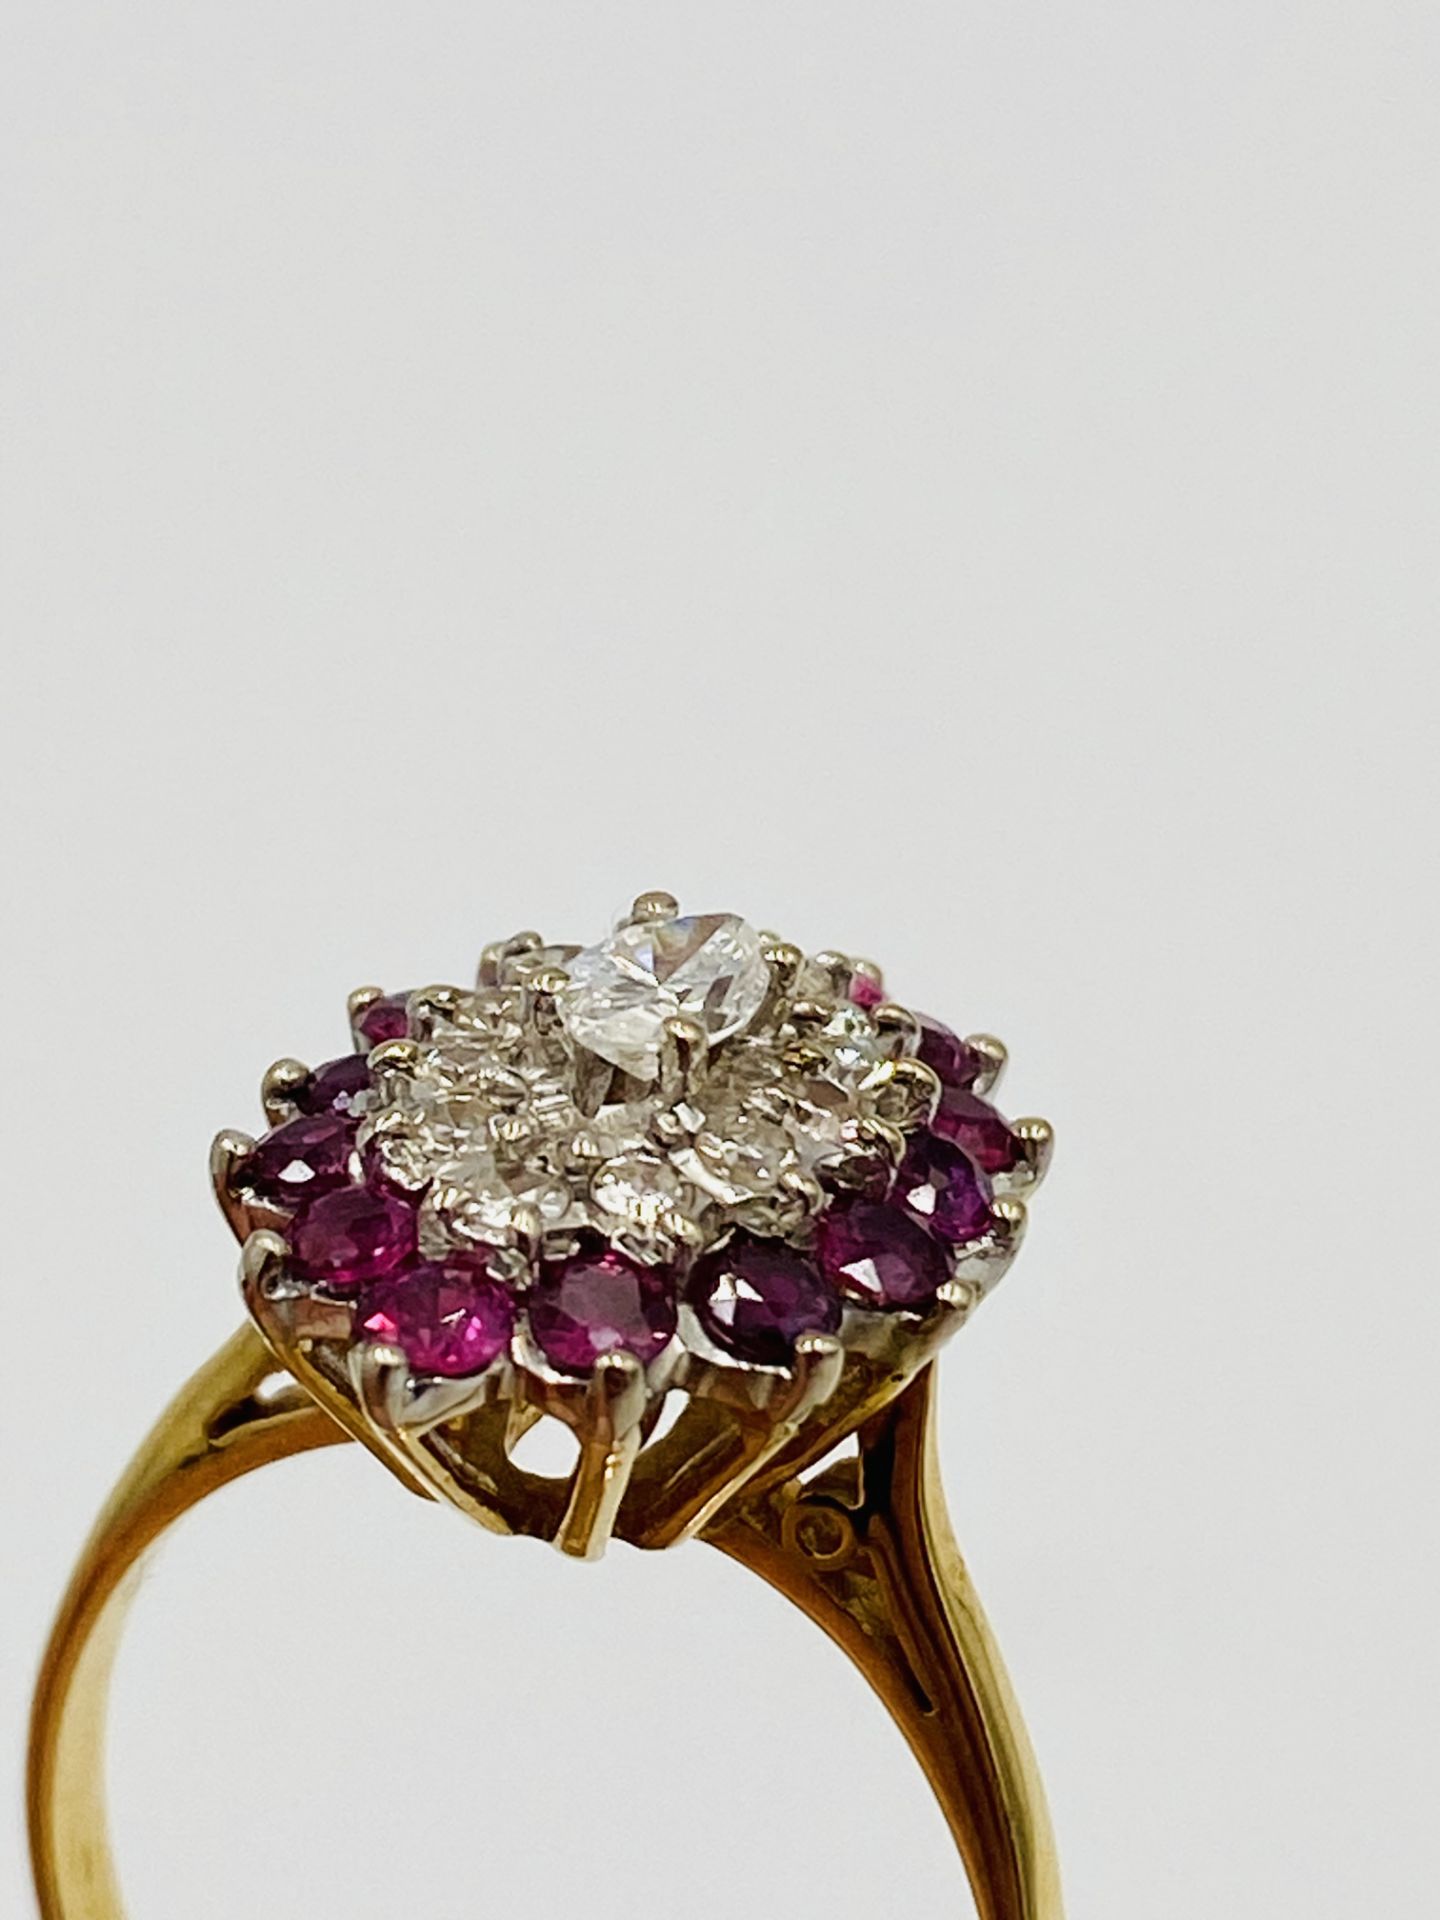 9ct gold ring set with diamonds and pink sapphires - Image 5 of 6